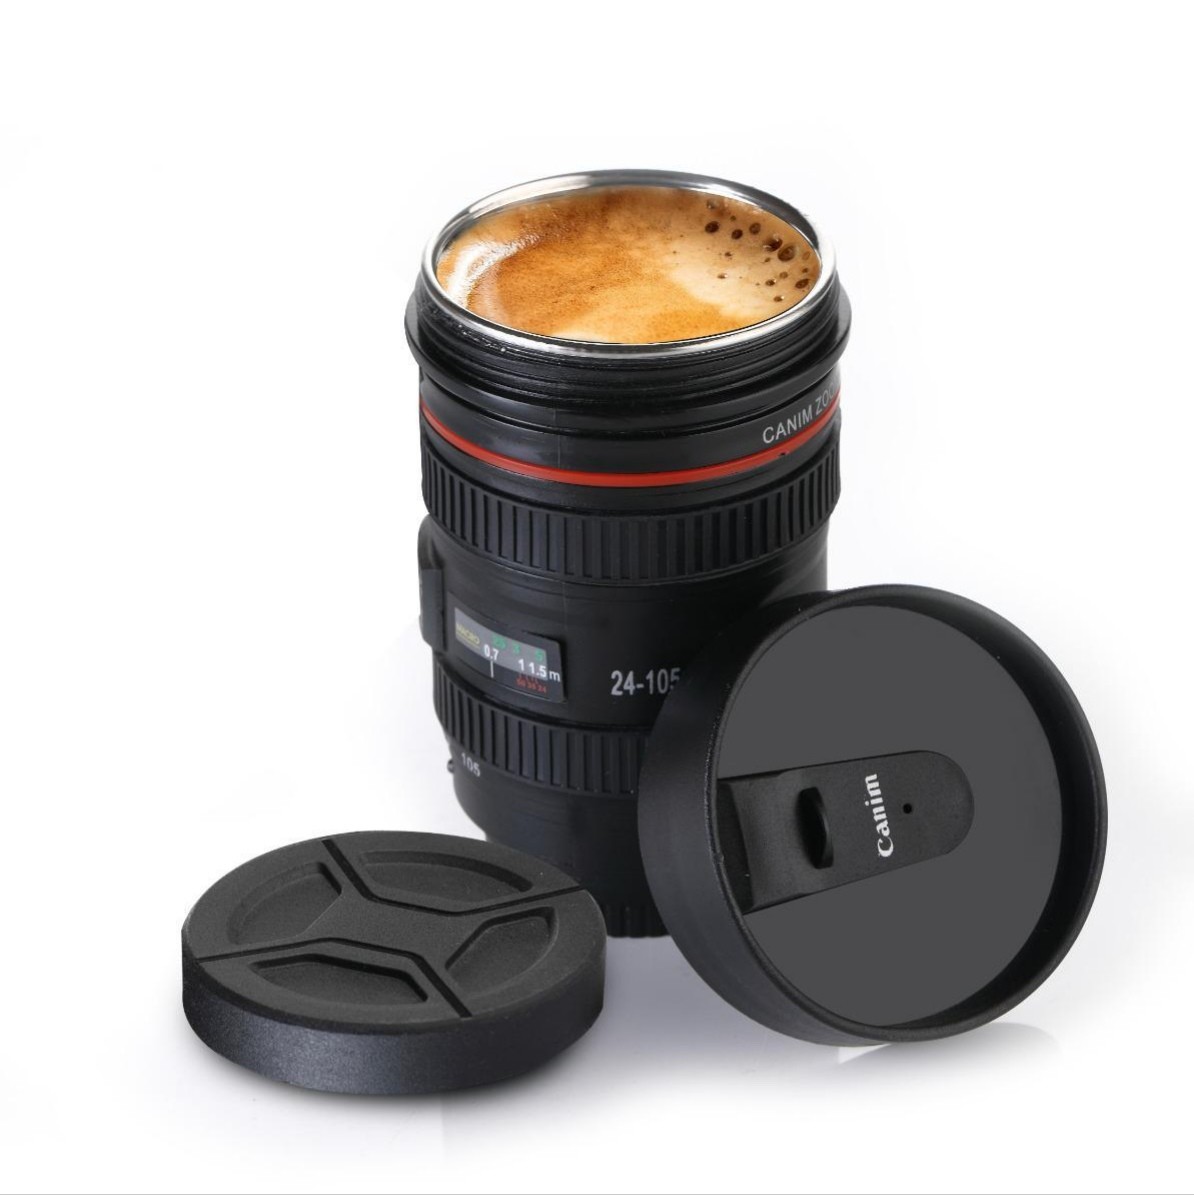 Camera Lens Shaped Coffee Mug with Lid and stainless steel Insulated coffee and TEA cup.